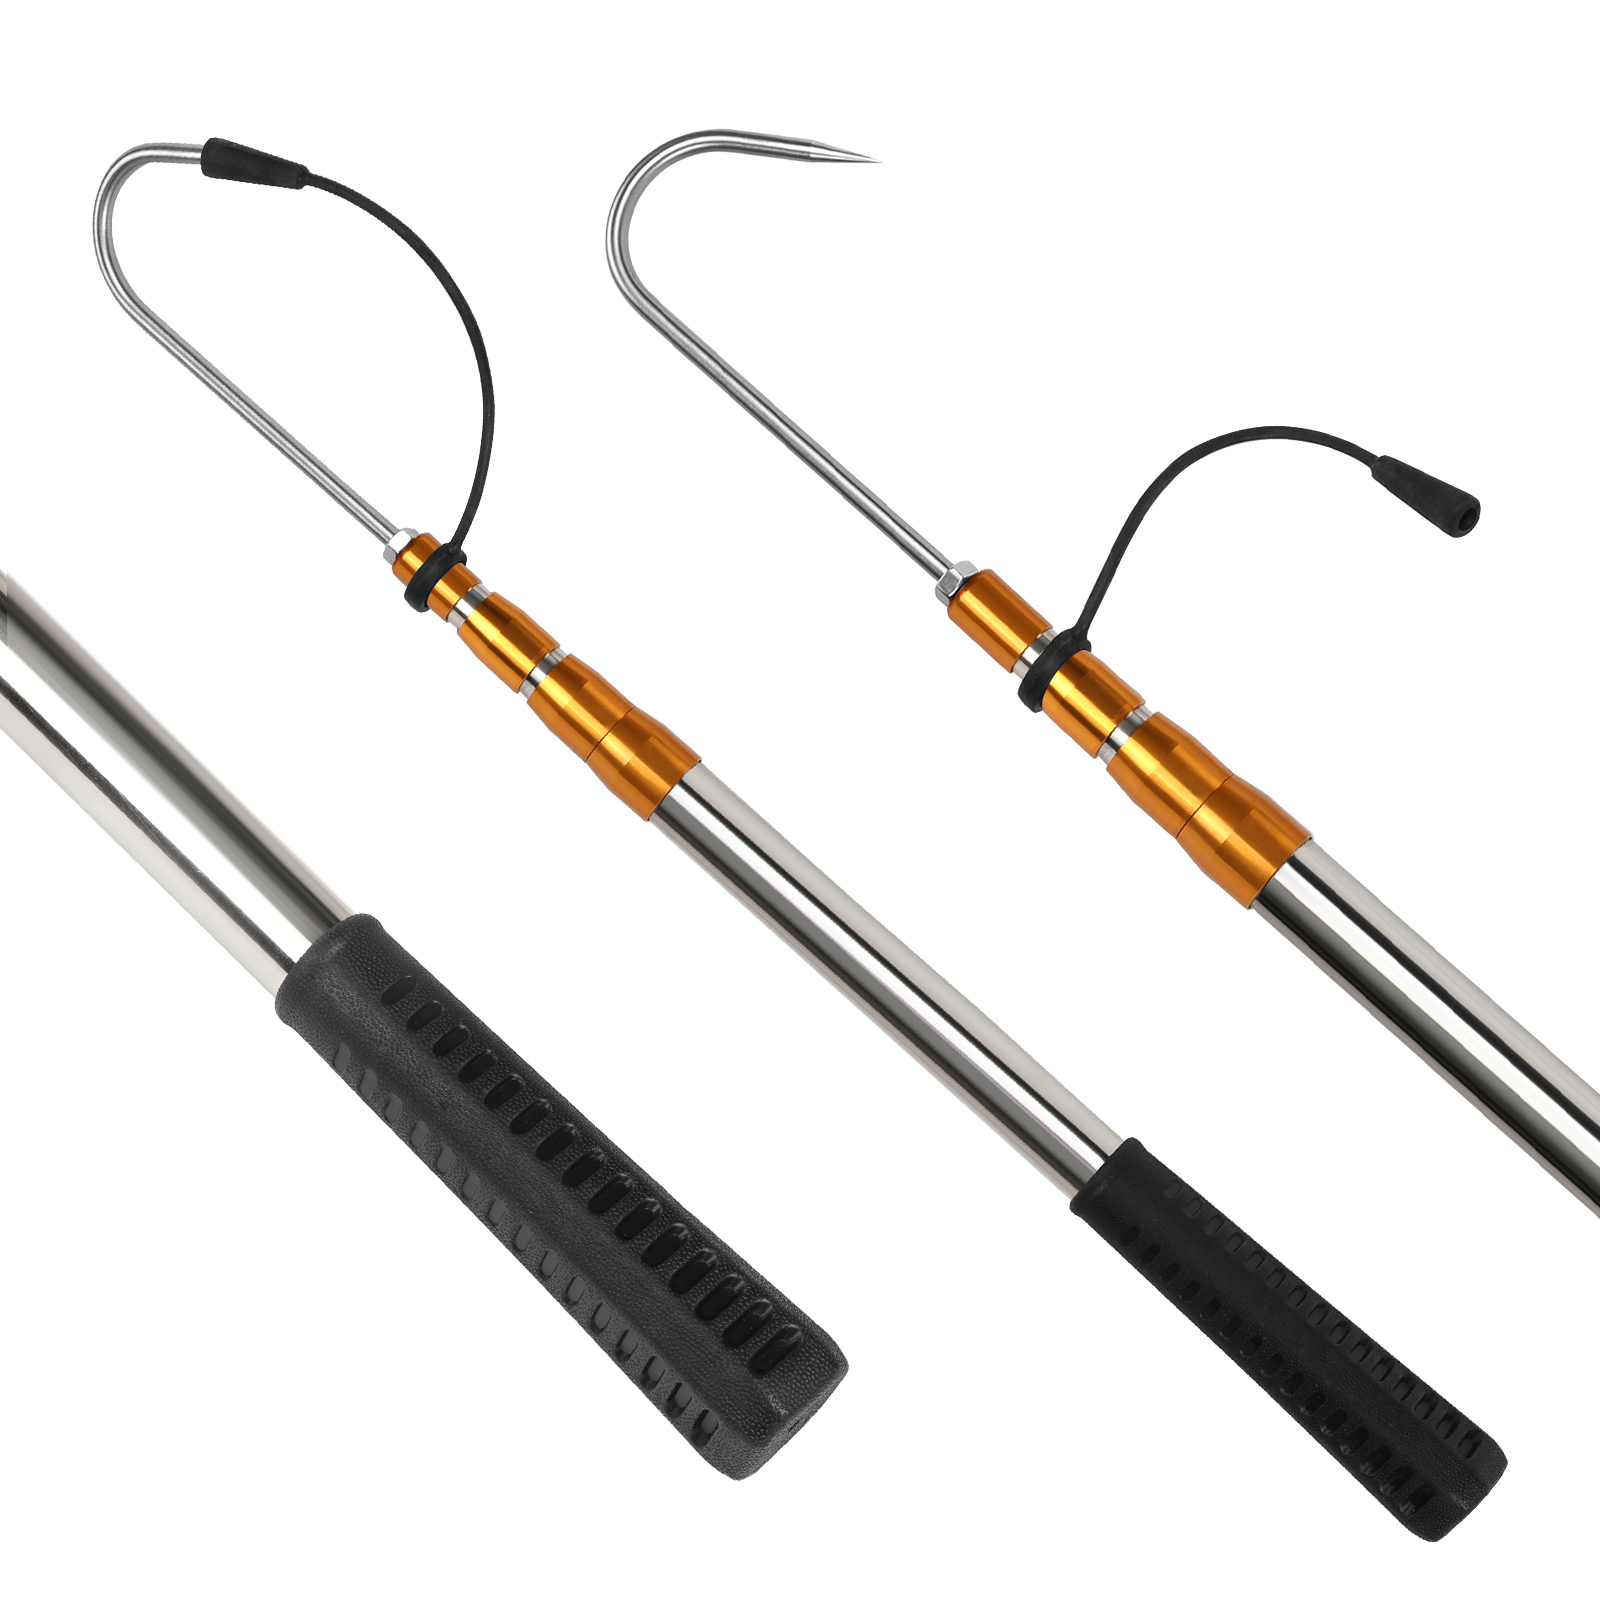 SANLIKE Telescopic Fishing Gaff with Super Sharp Spear Hook Lightweight  Hand Fish Gaff with Soft Rubber Nonslip Handle and Lanyard for Freshwater  Offshore Fishing Boating Outdoor